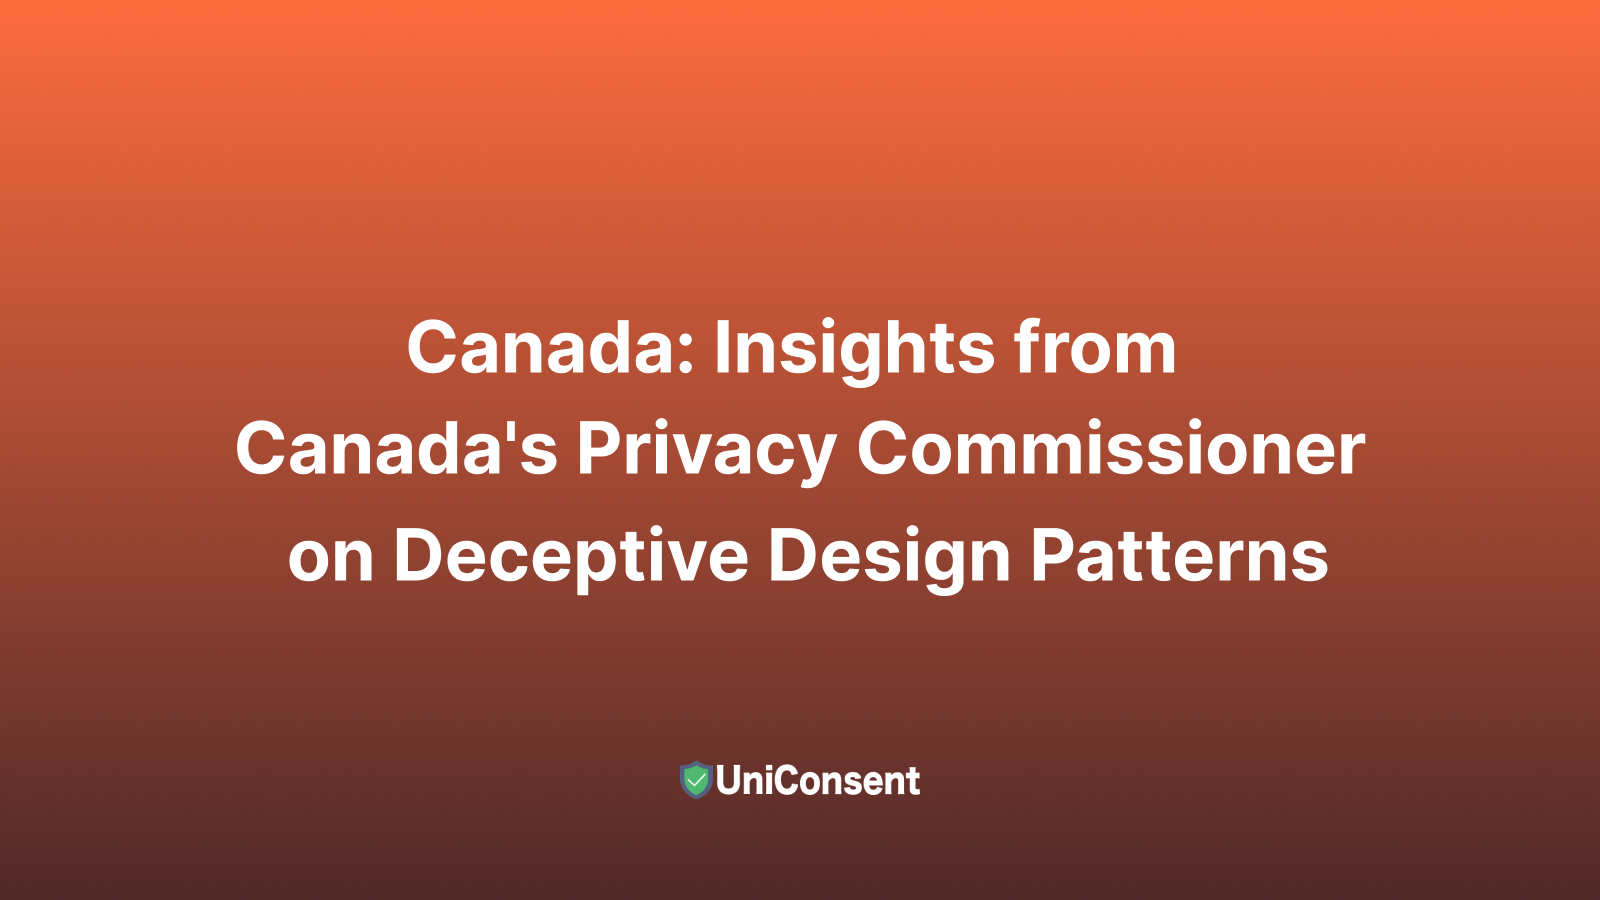 Canada: Insights from Canada's Privacy Commissioner on Deceptive Design Patterns